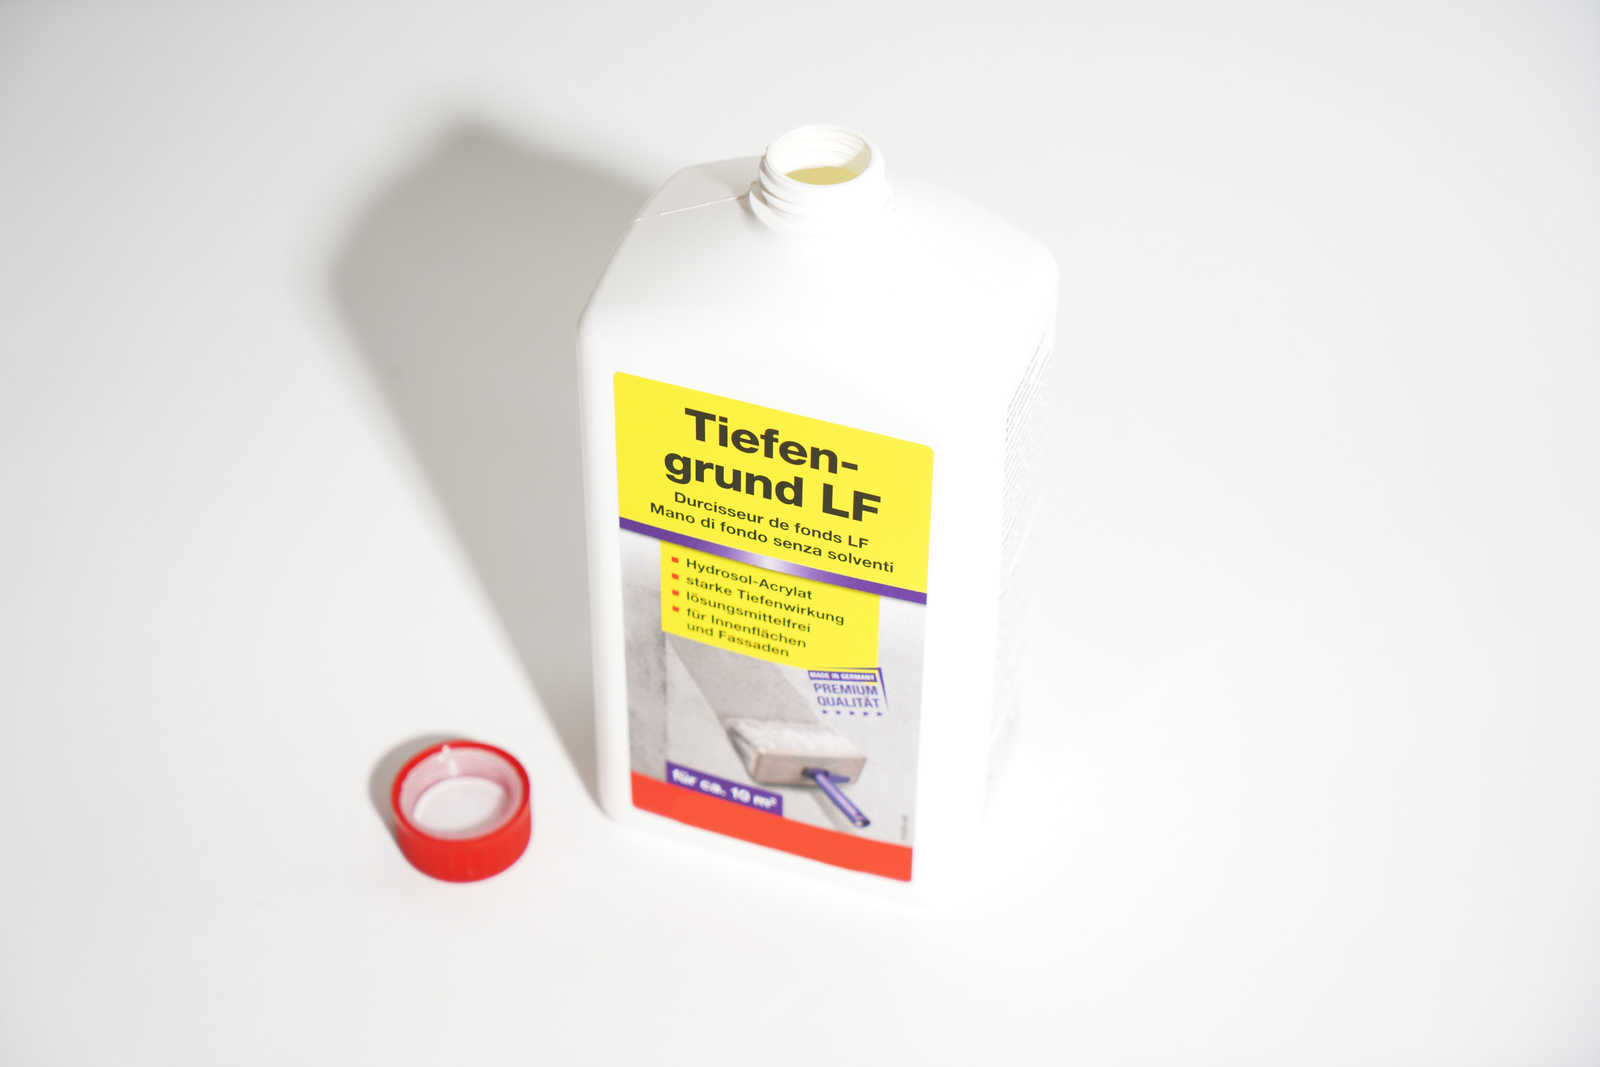             Tiefengrung 1L, for priming wall surfaces
        